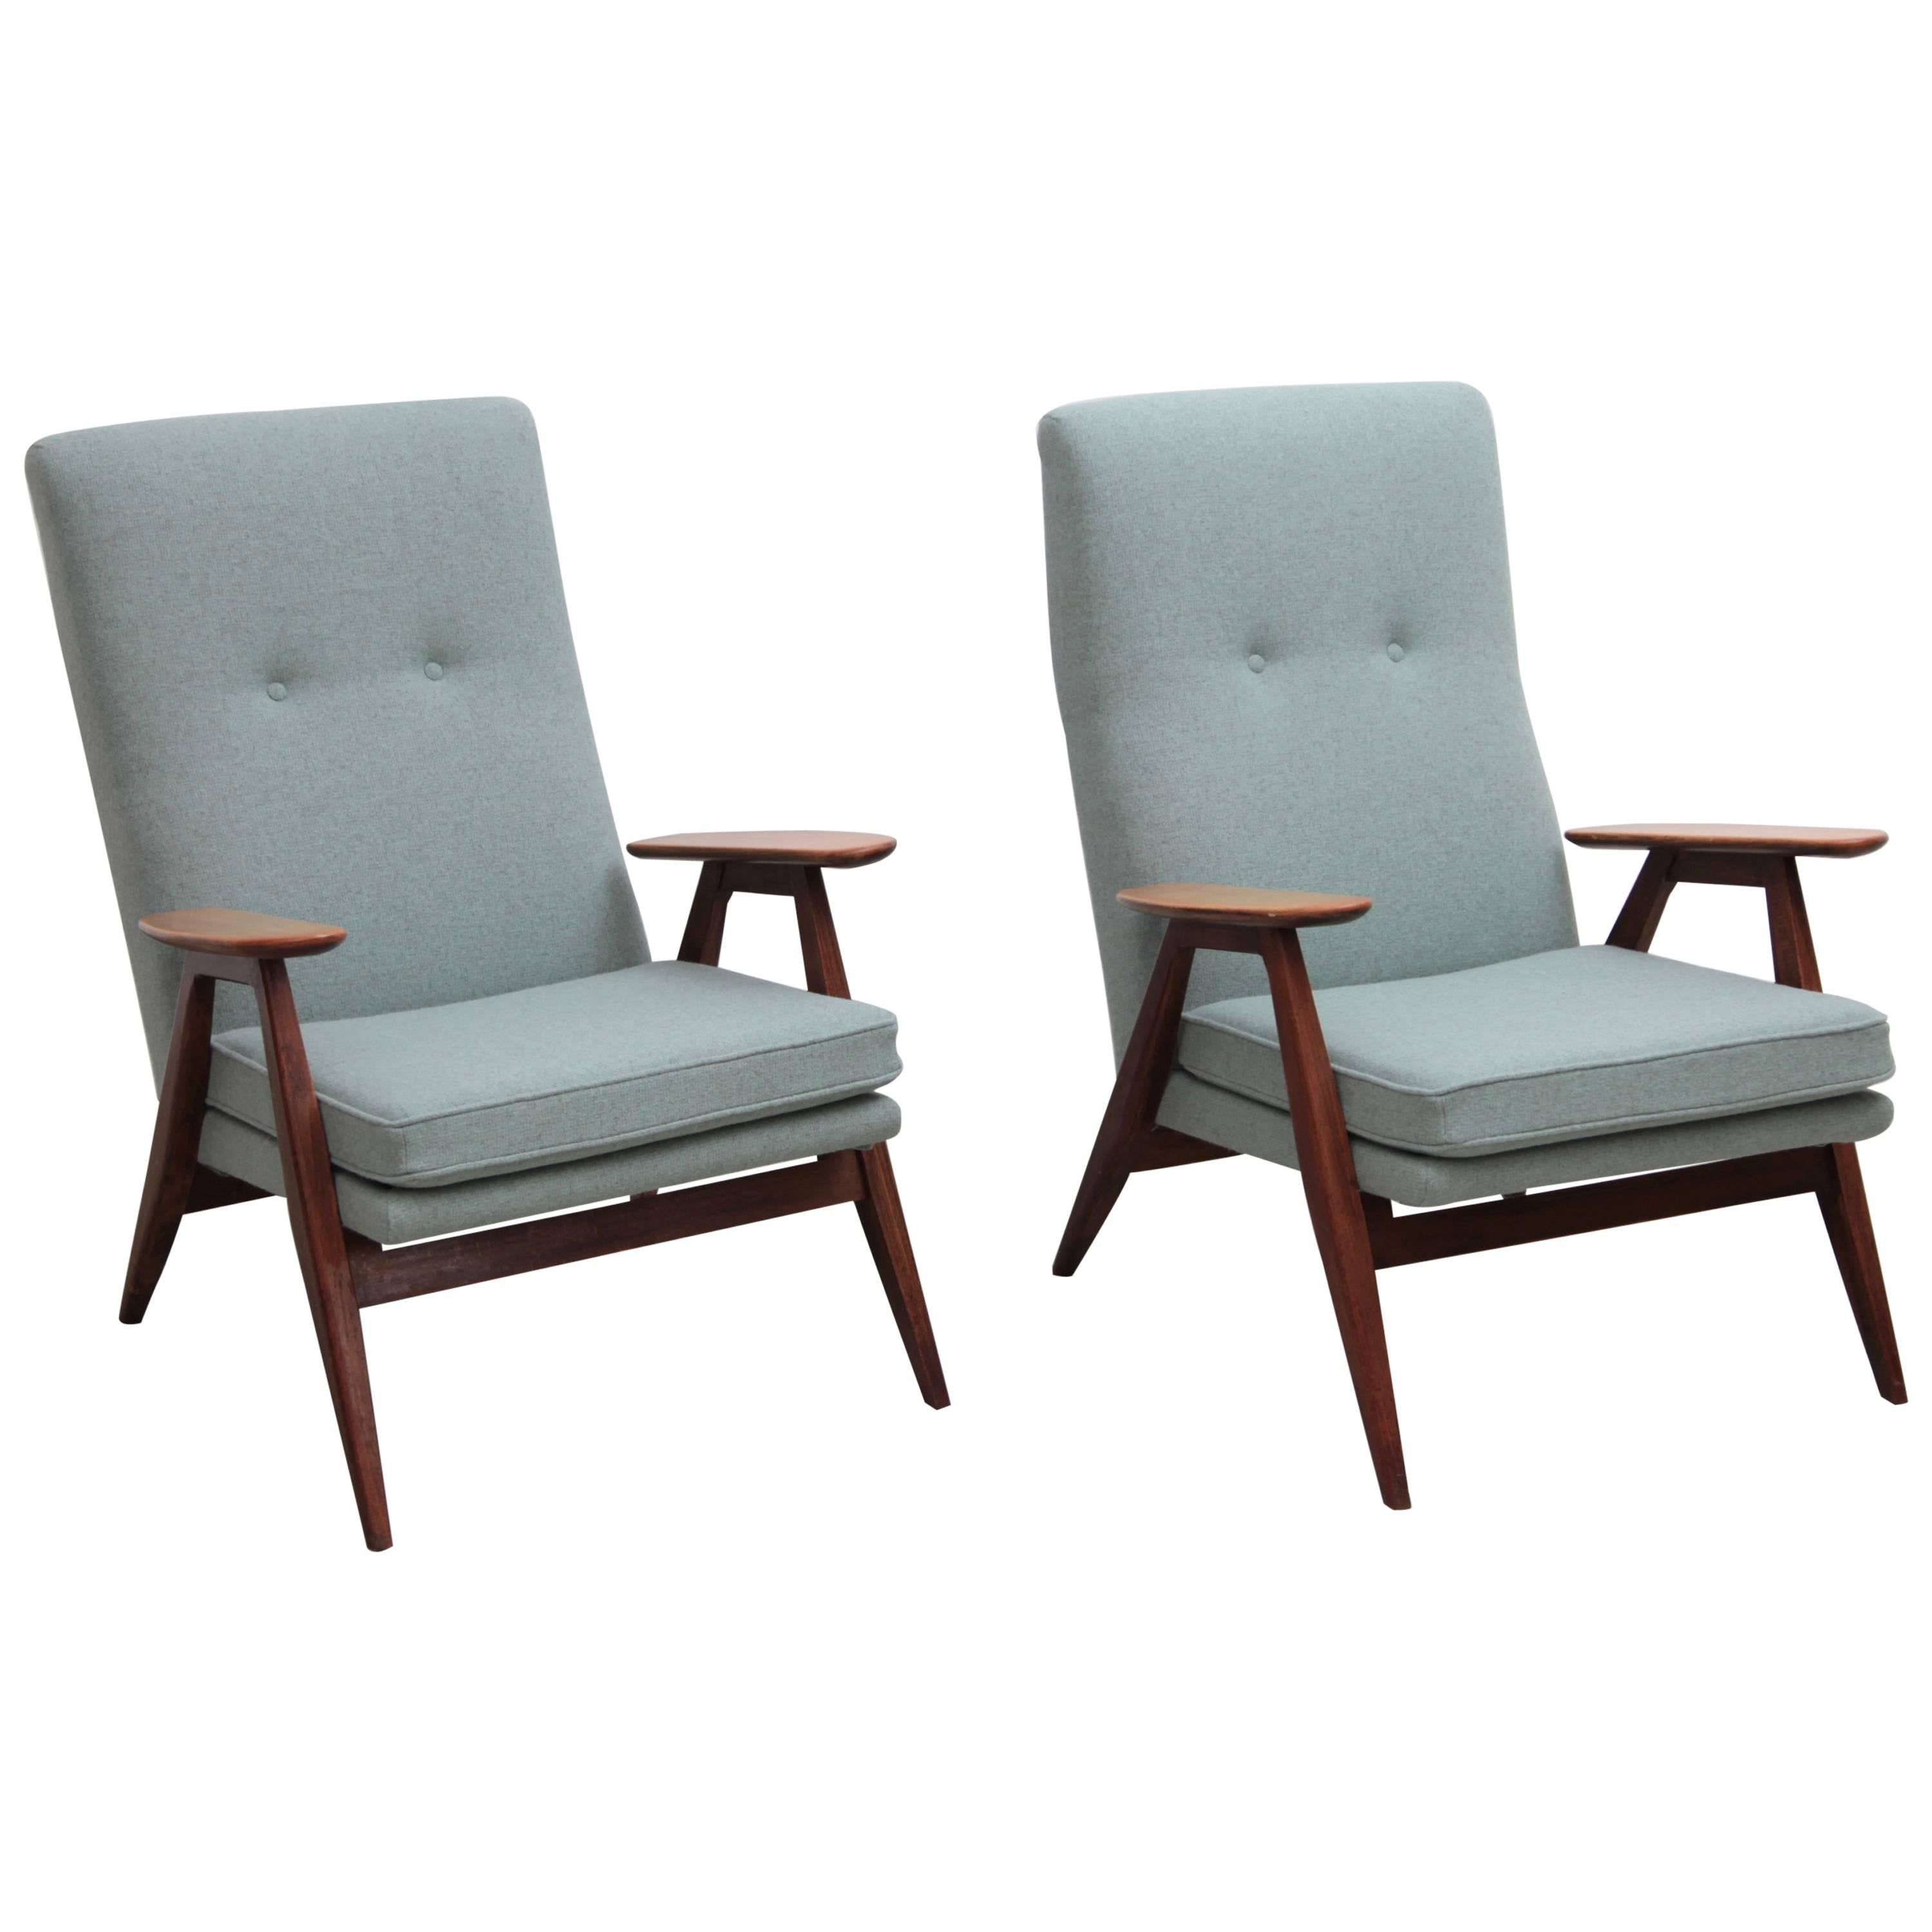 Fully Restored Pair of Pierre Guariche SK640 Lounge Chairs for Steiner